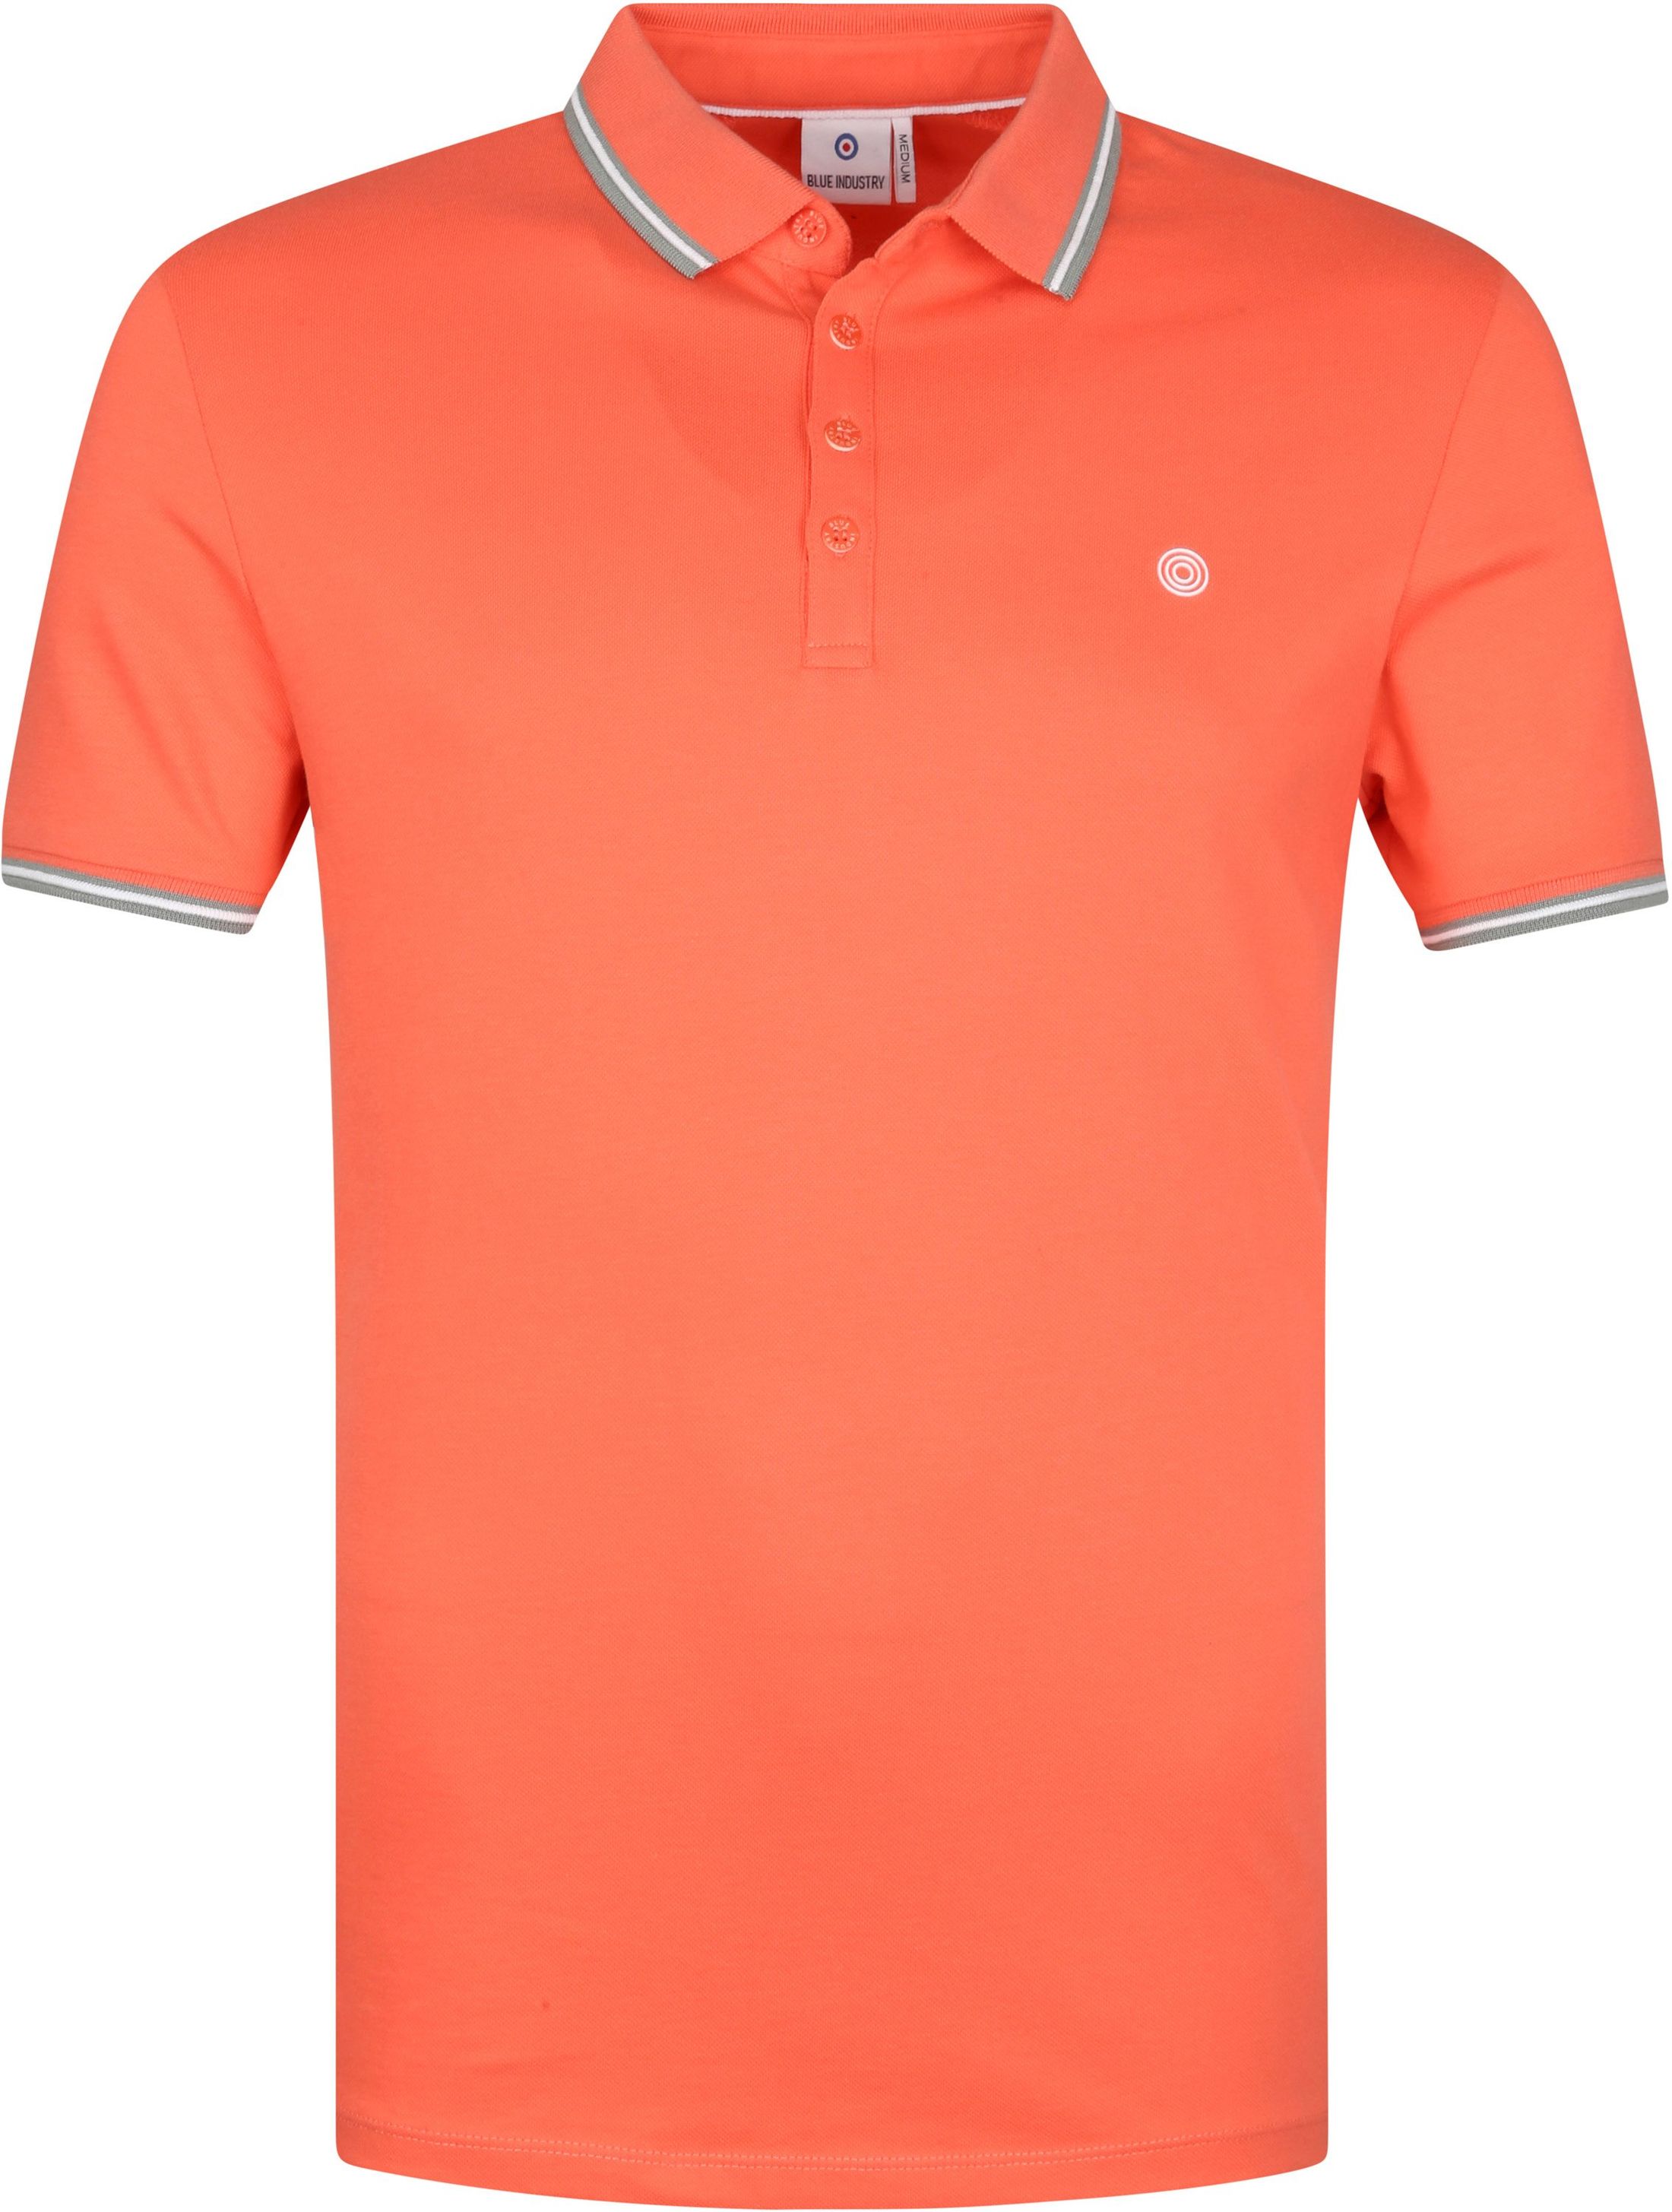 Blue Industry Polo Shirt M24 Coral Red Orange size L